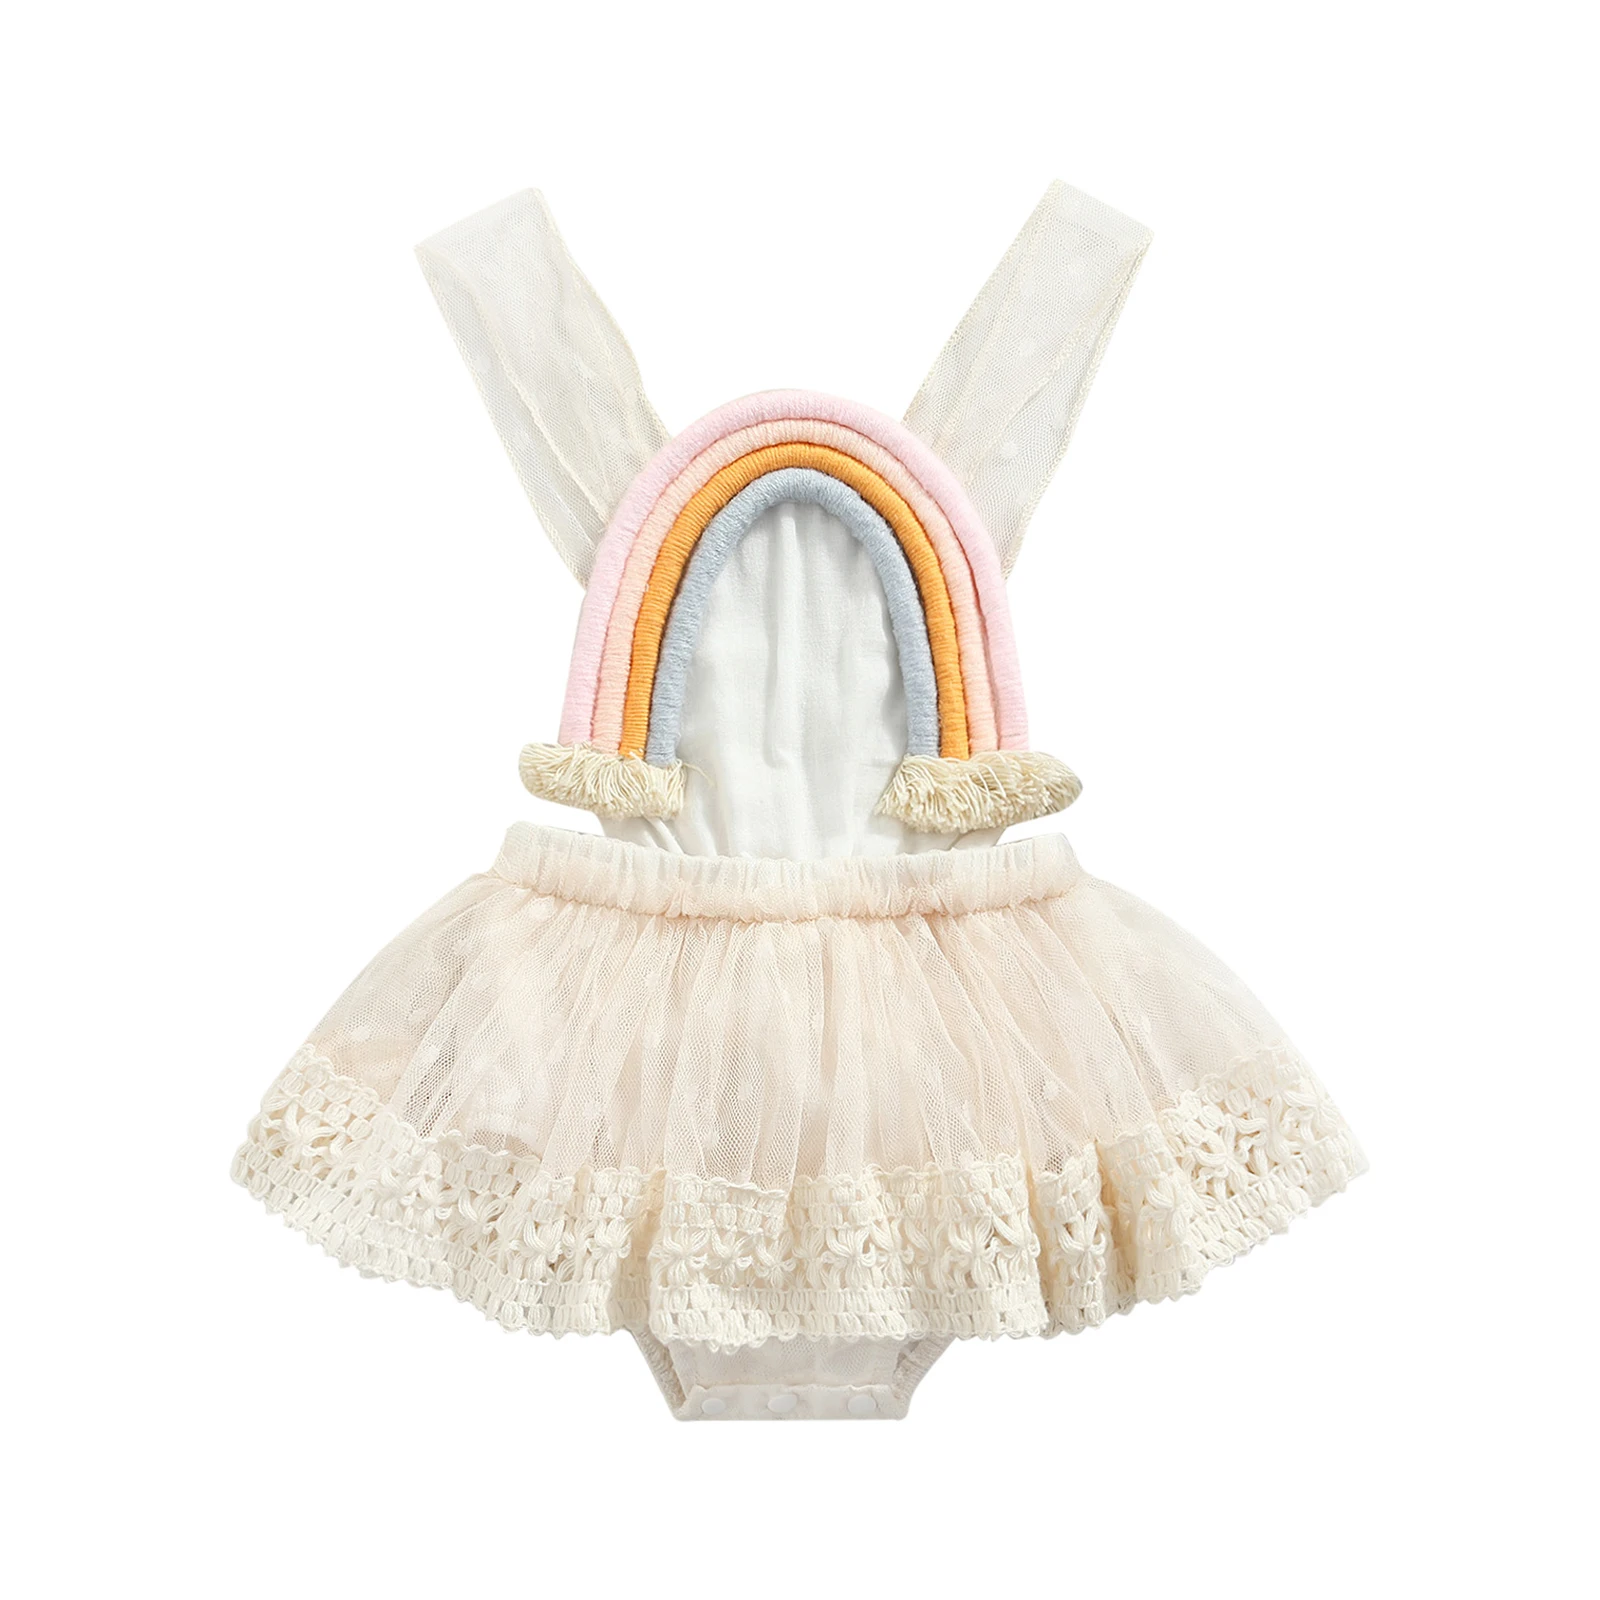 Ma&Baby 0-24M Newborn Infant Baby Girls Rainbow Rompers 1st Birthday Lace Jumpsuit Princess Clothes Overalls Costumes D84 baby bodysuit dress